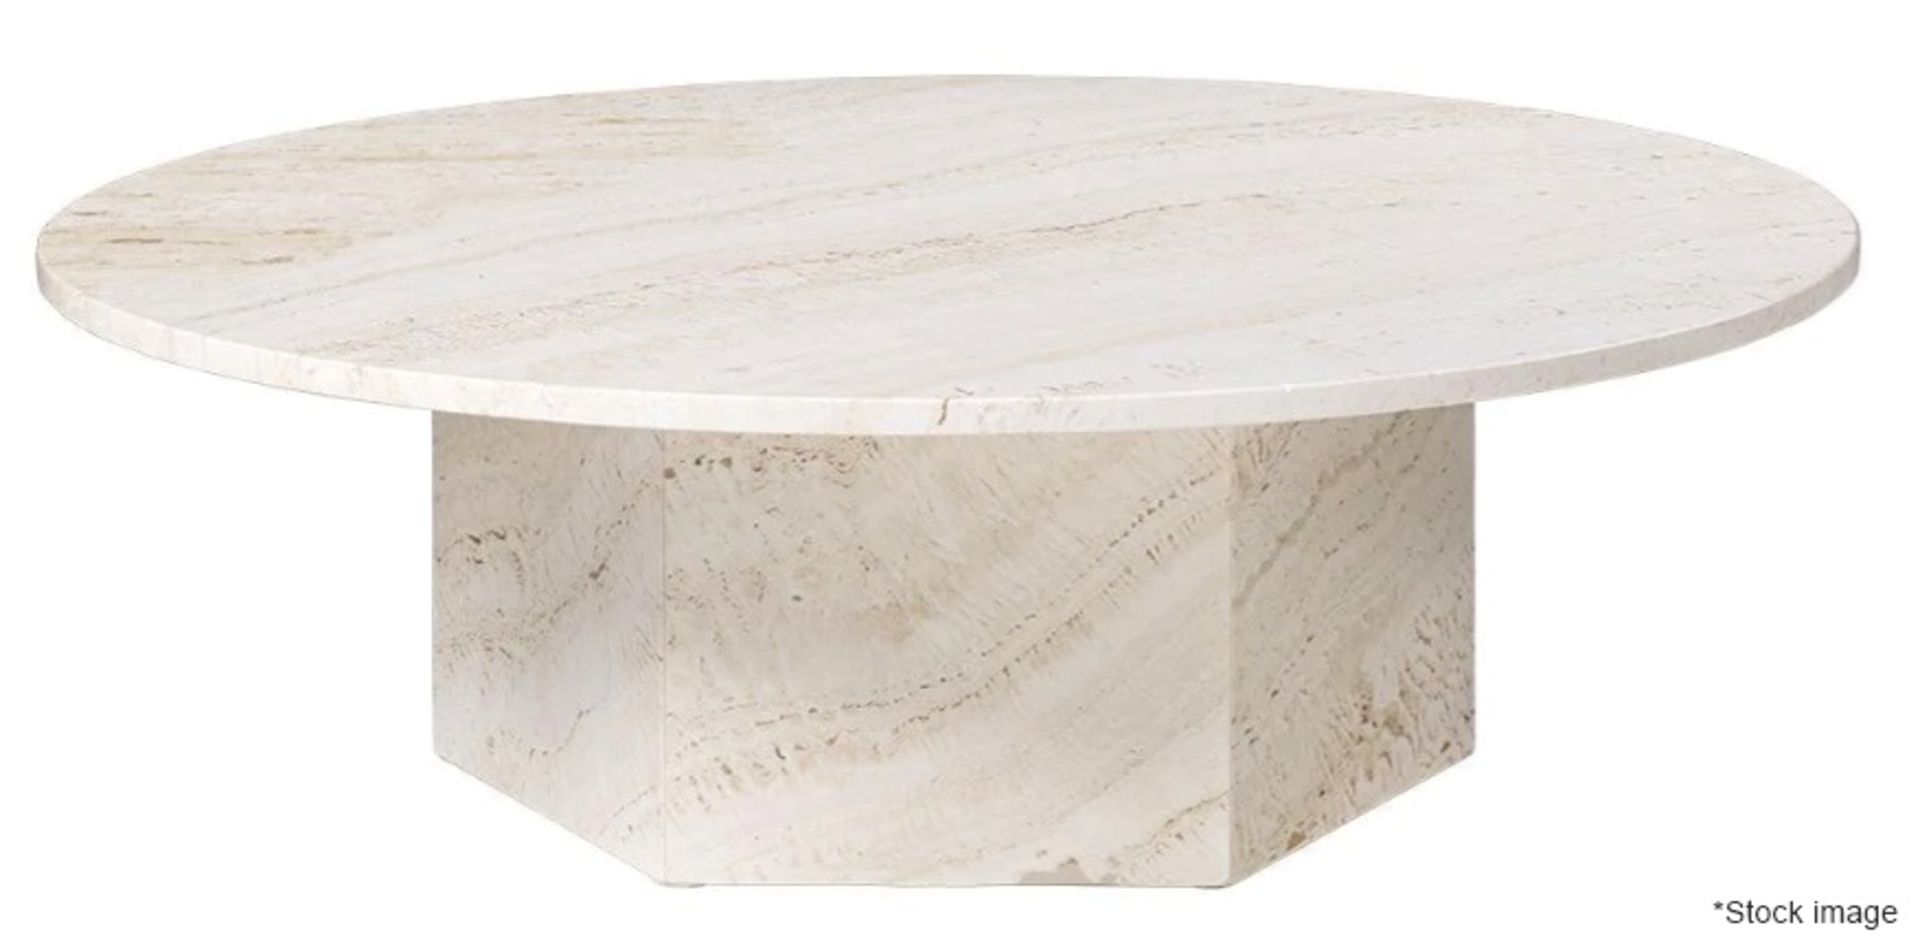 1 x GUBI 'Epic' Large Luxury Round ⌀130cm Travertine Coffee Table Top In Pale Cream (No Base)